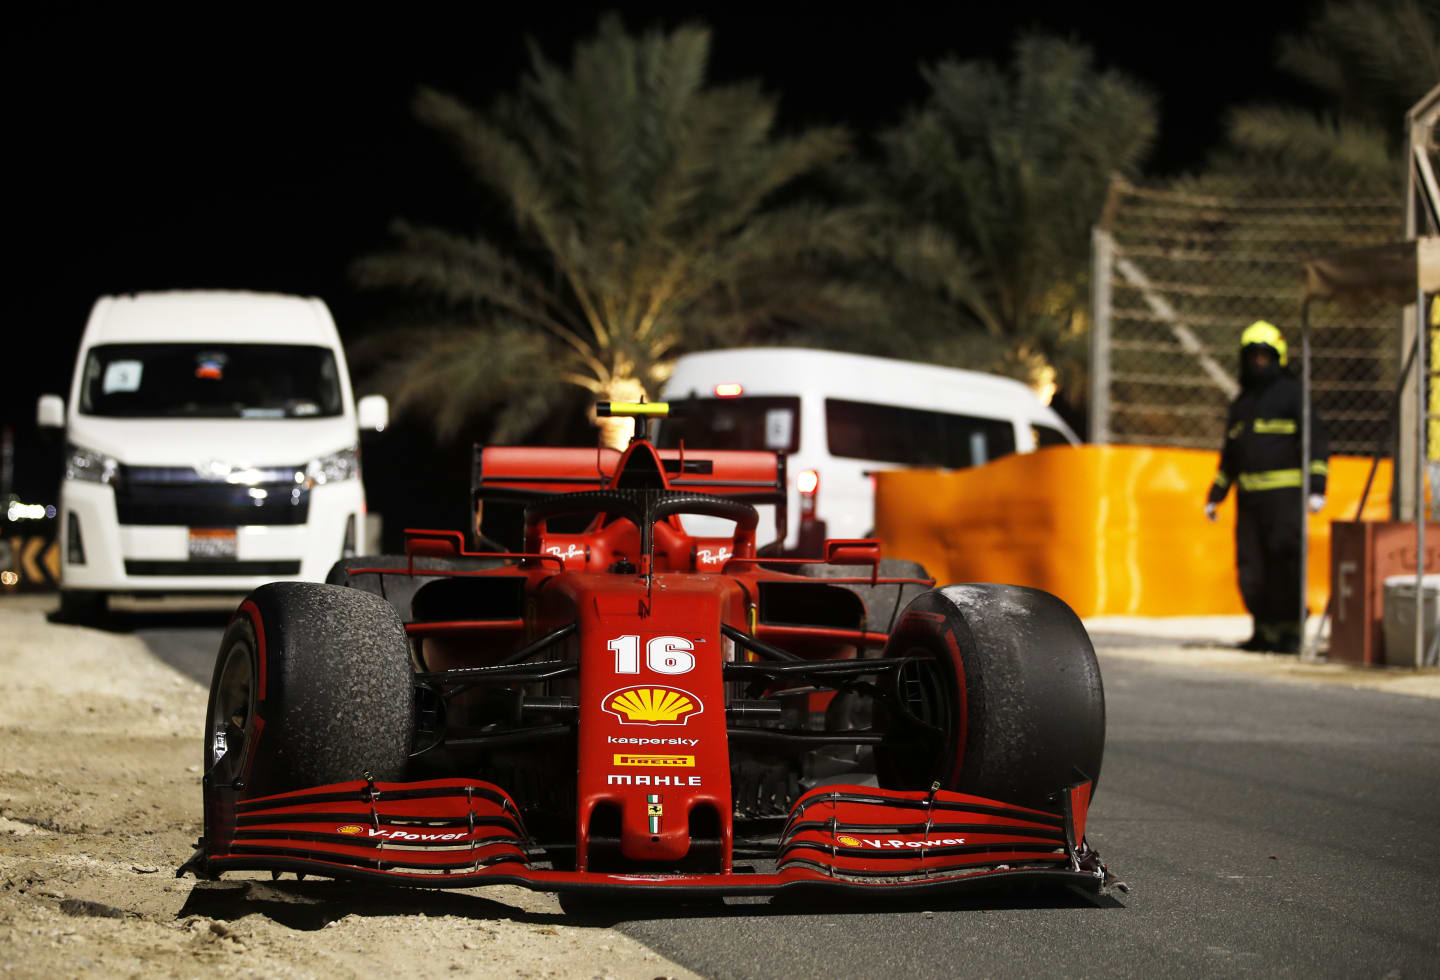 BAHRAIN, BAHRAIN - DECEMBER 06: The car of Charles Leclerc of Monaco and Ferrari is pictured at the